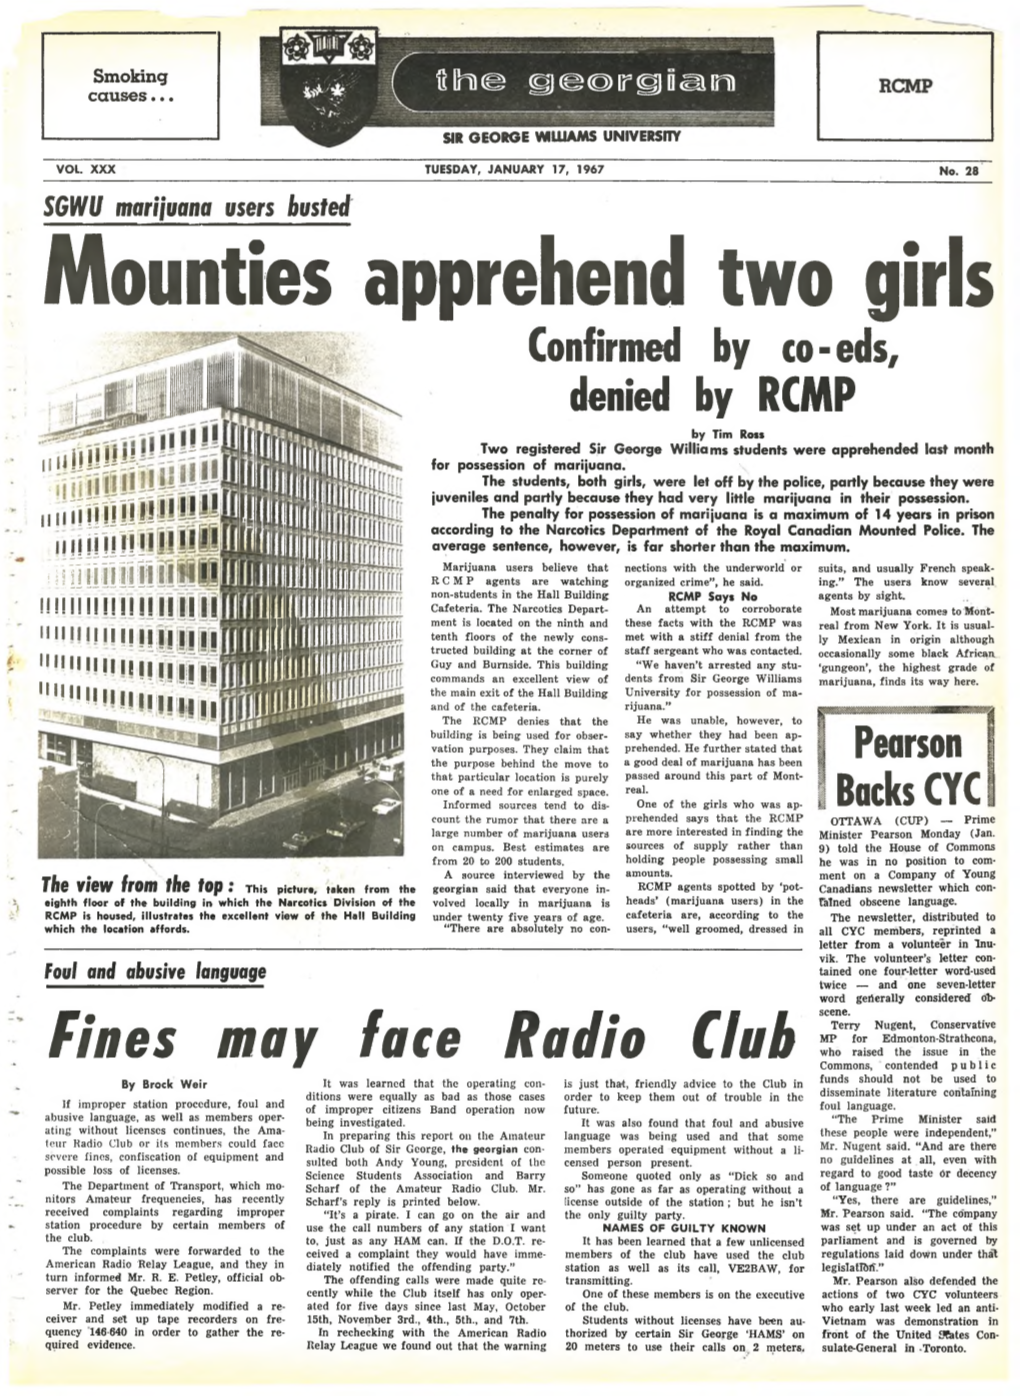 Mounties Apprehend Two Girls Confirmed by Co-Eds, Denied by RCMP